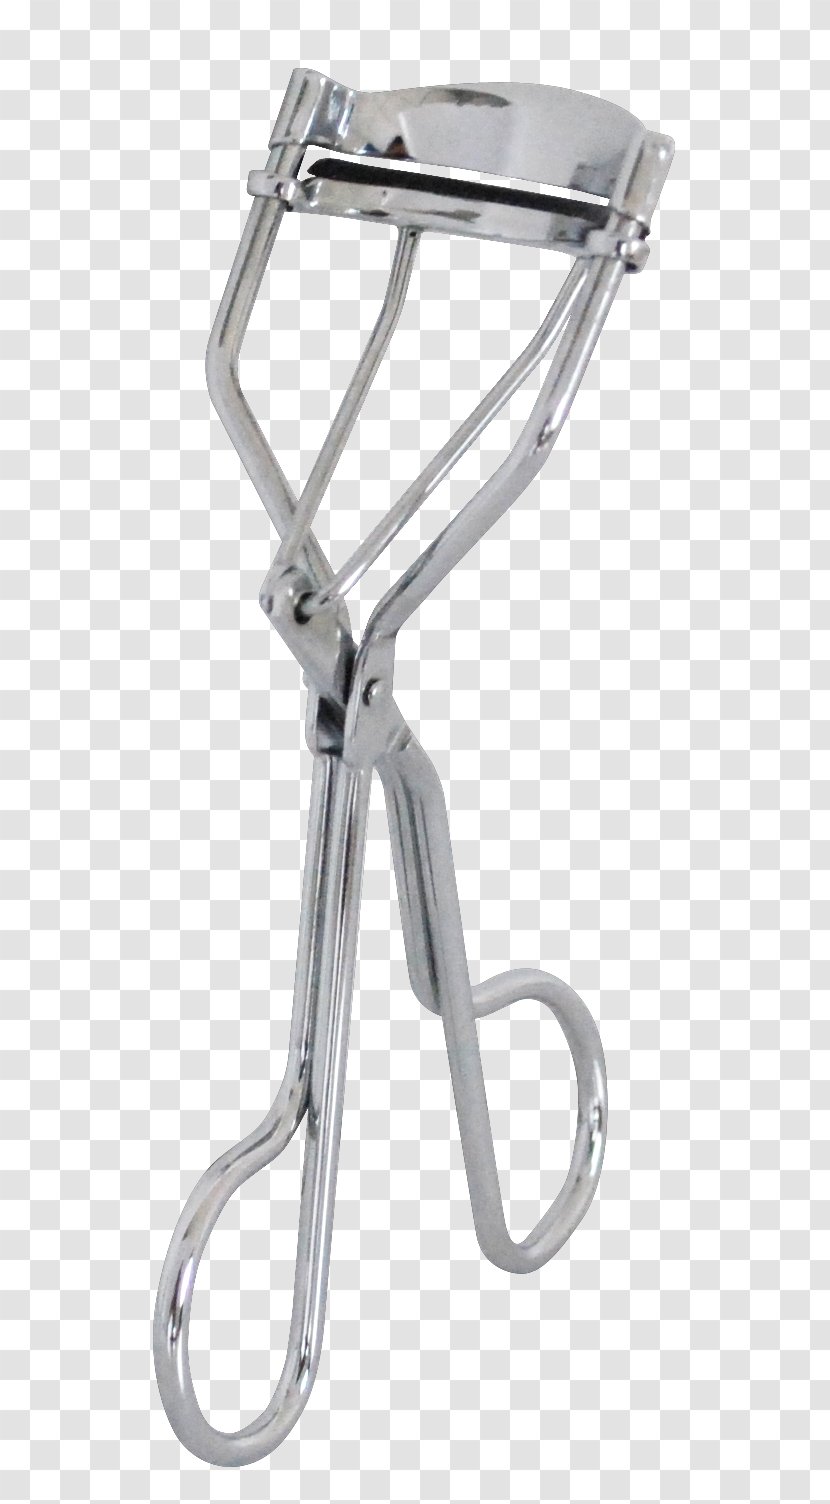 Eyelash Curlers Extensions Cosmetics - Private Label - Curler Transparent PNG